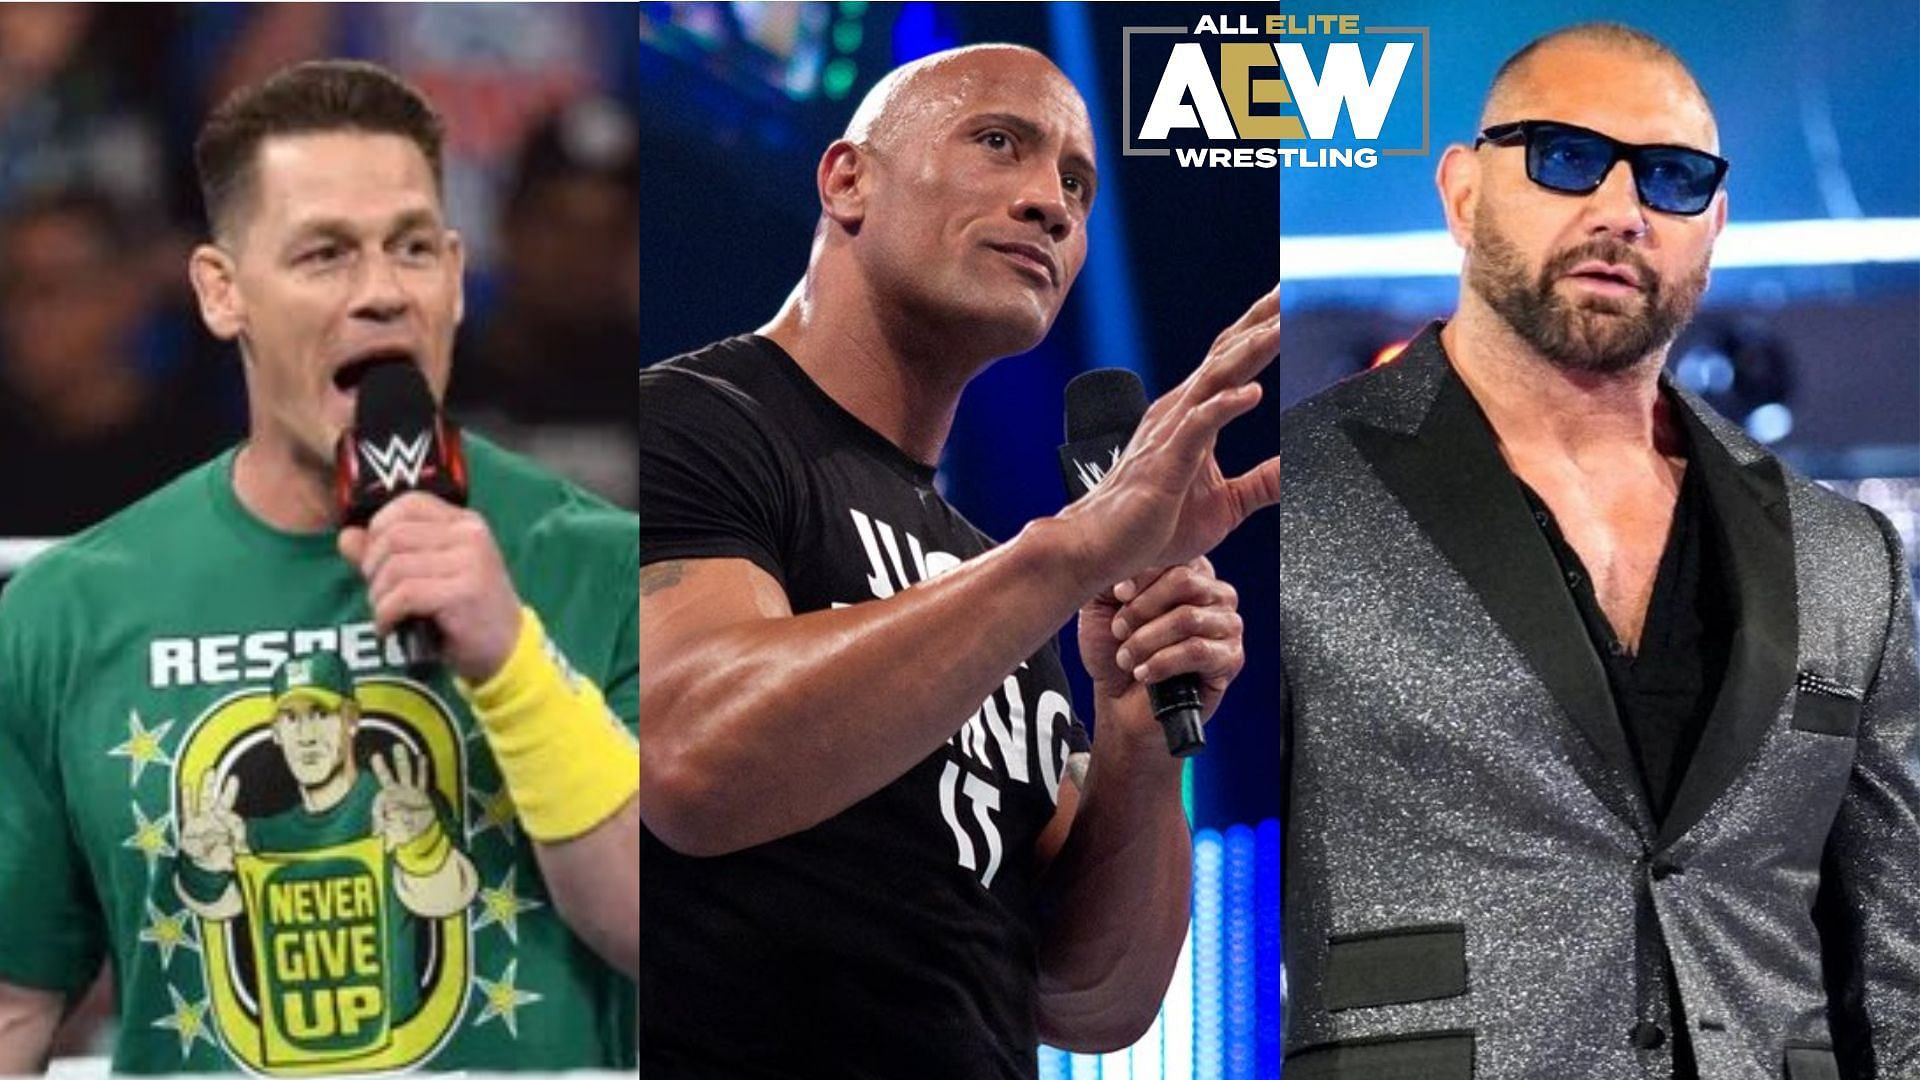 A top AEW star wants to follow in the footsteps of John Cena, The Rock and Batista